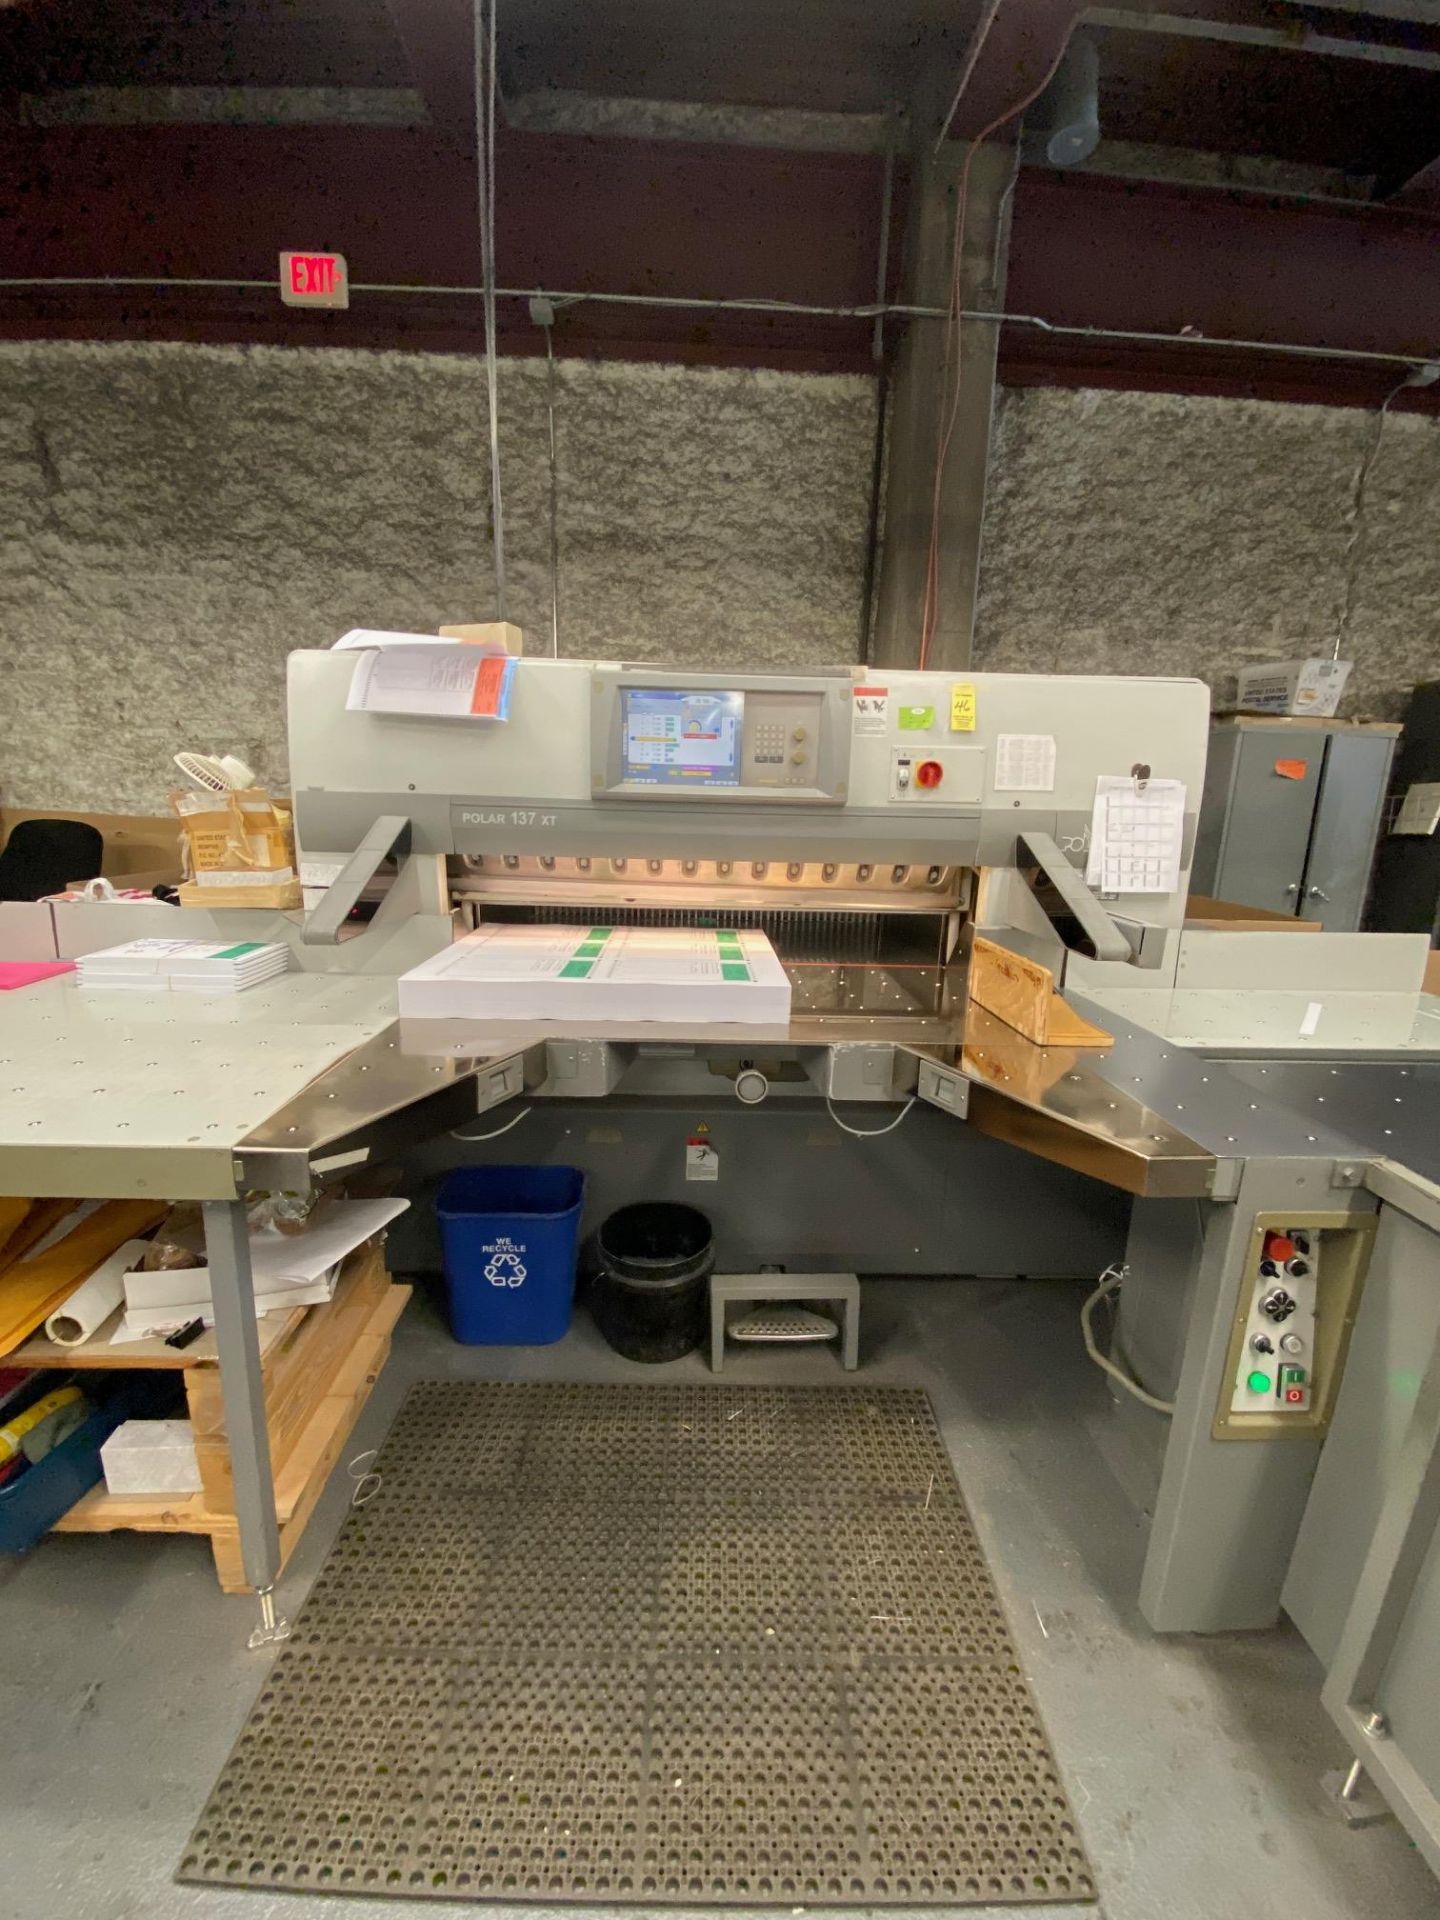 2004 Polar 137XT 54" Paper Cutter, s/n 7441210, w/Complete Workflow Including 2002 - Image 2 of 9